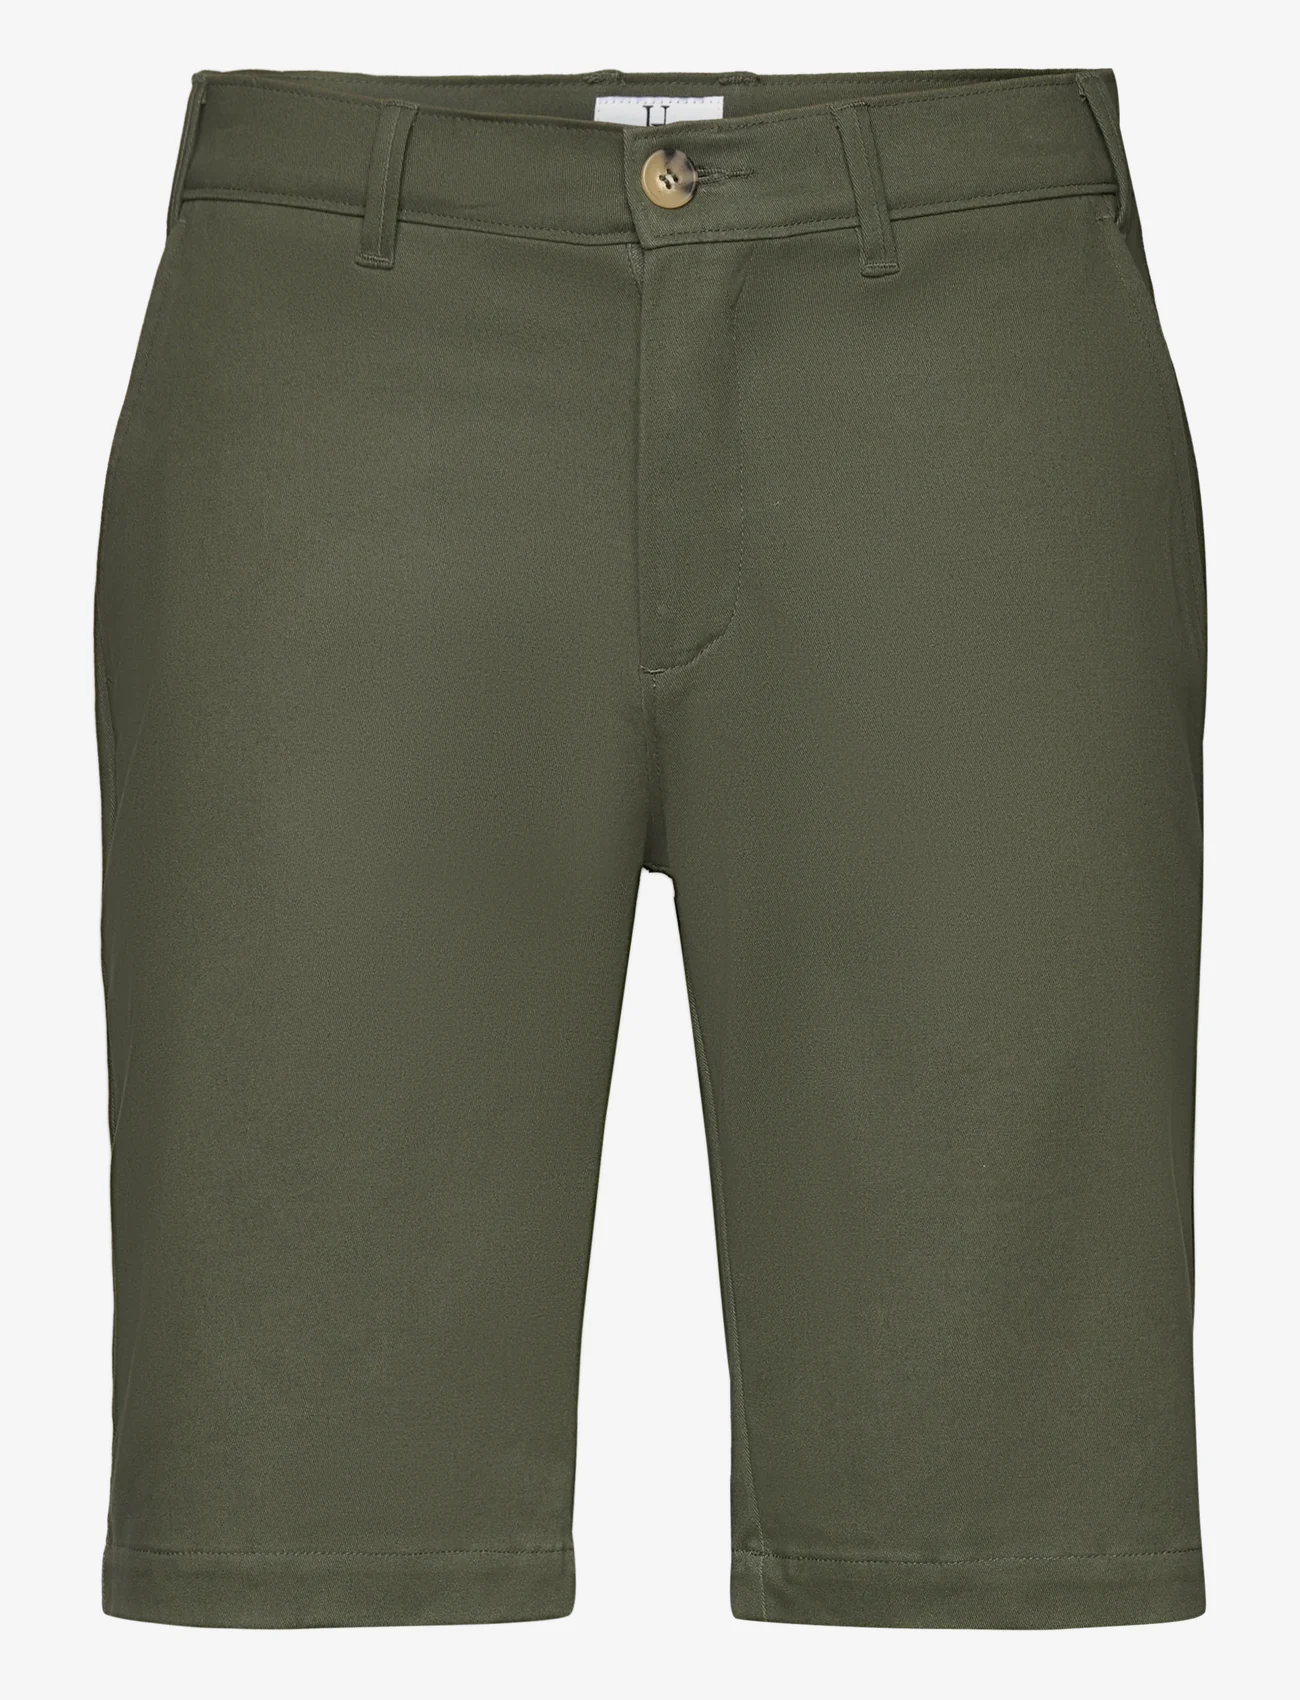 Urban Pioneers - Toby Shorts - olive - 0